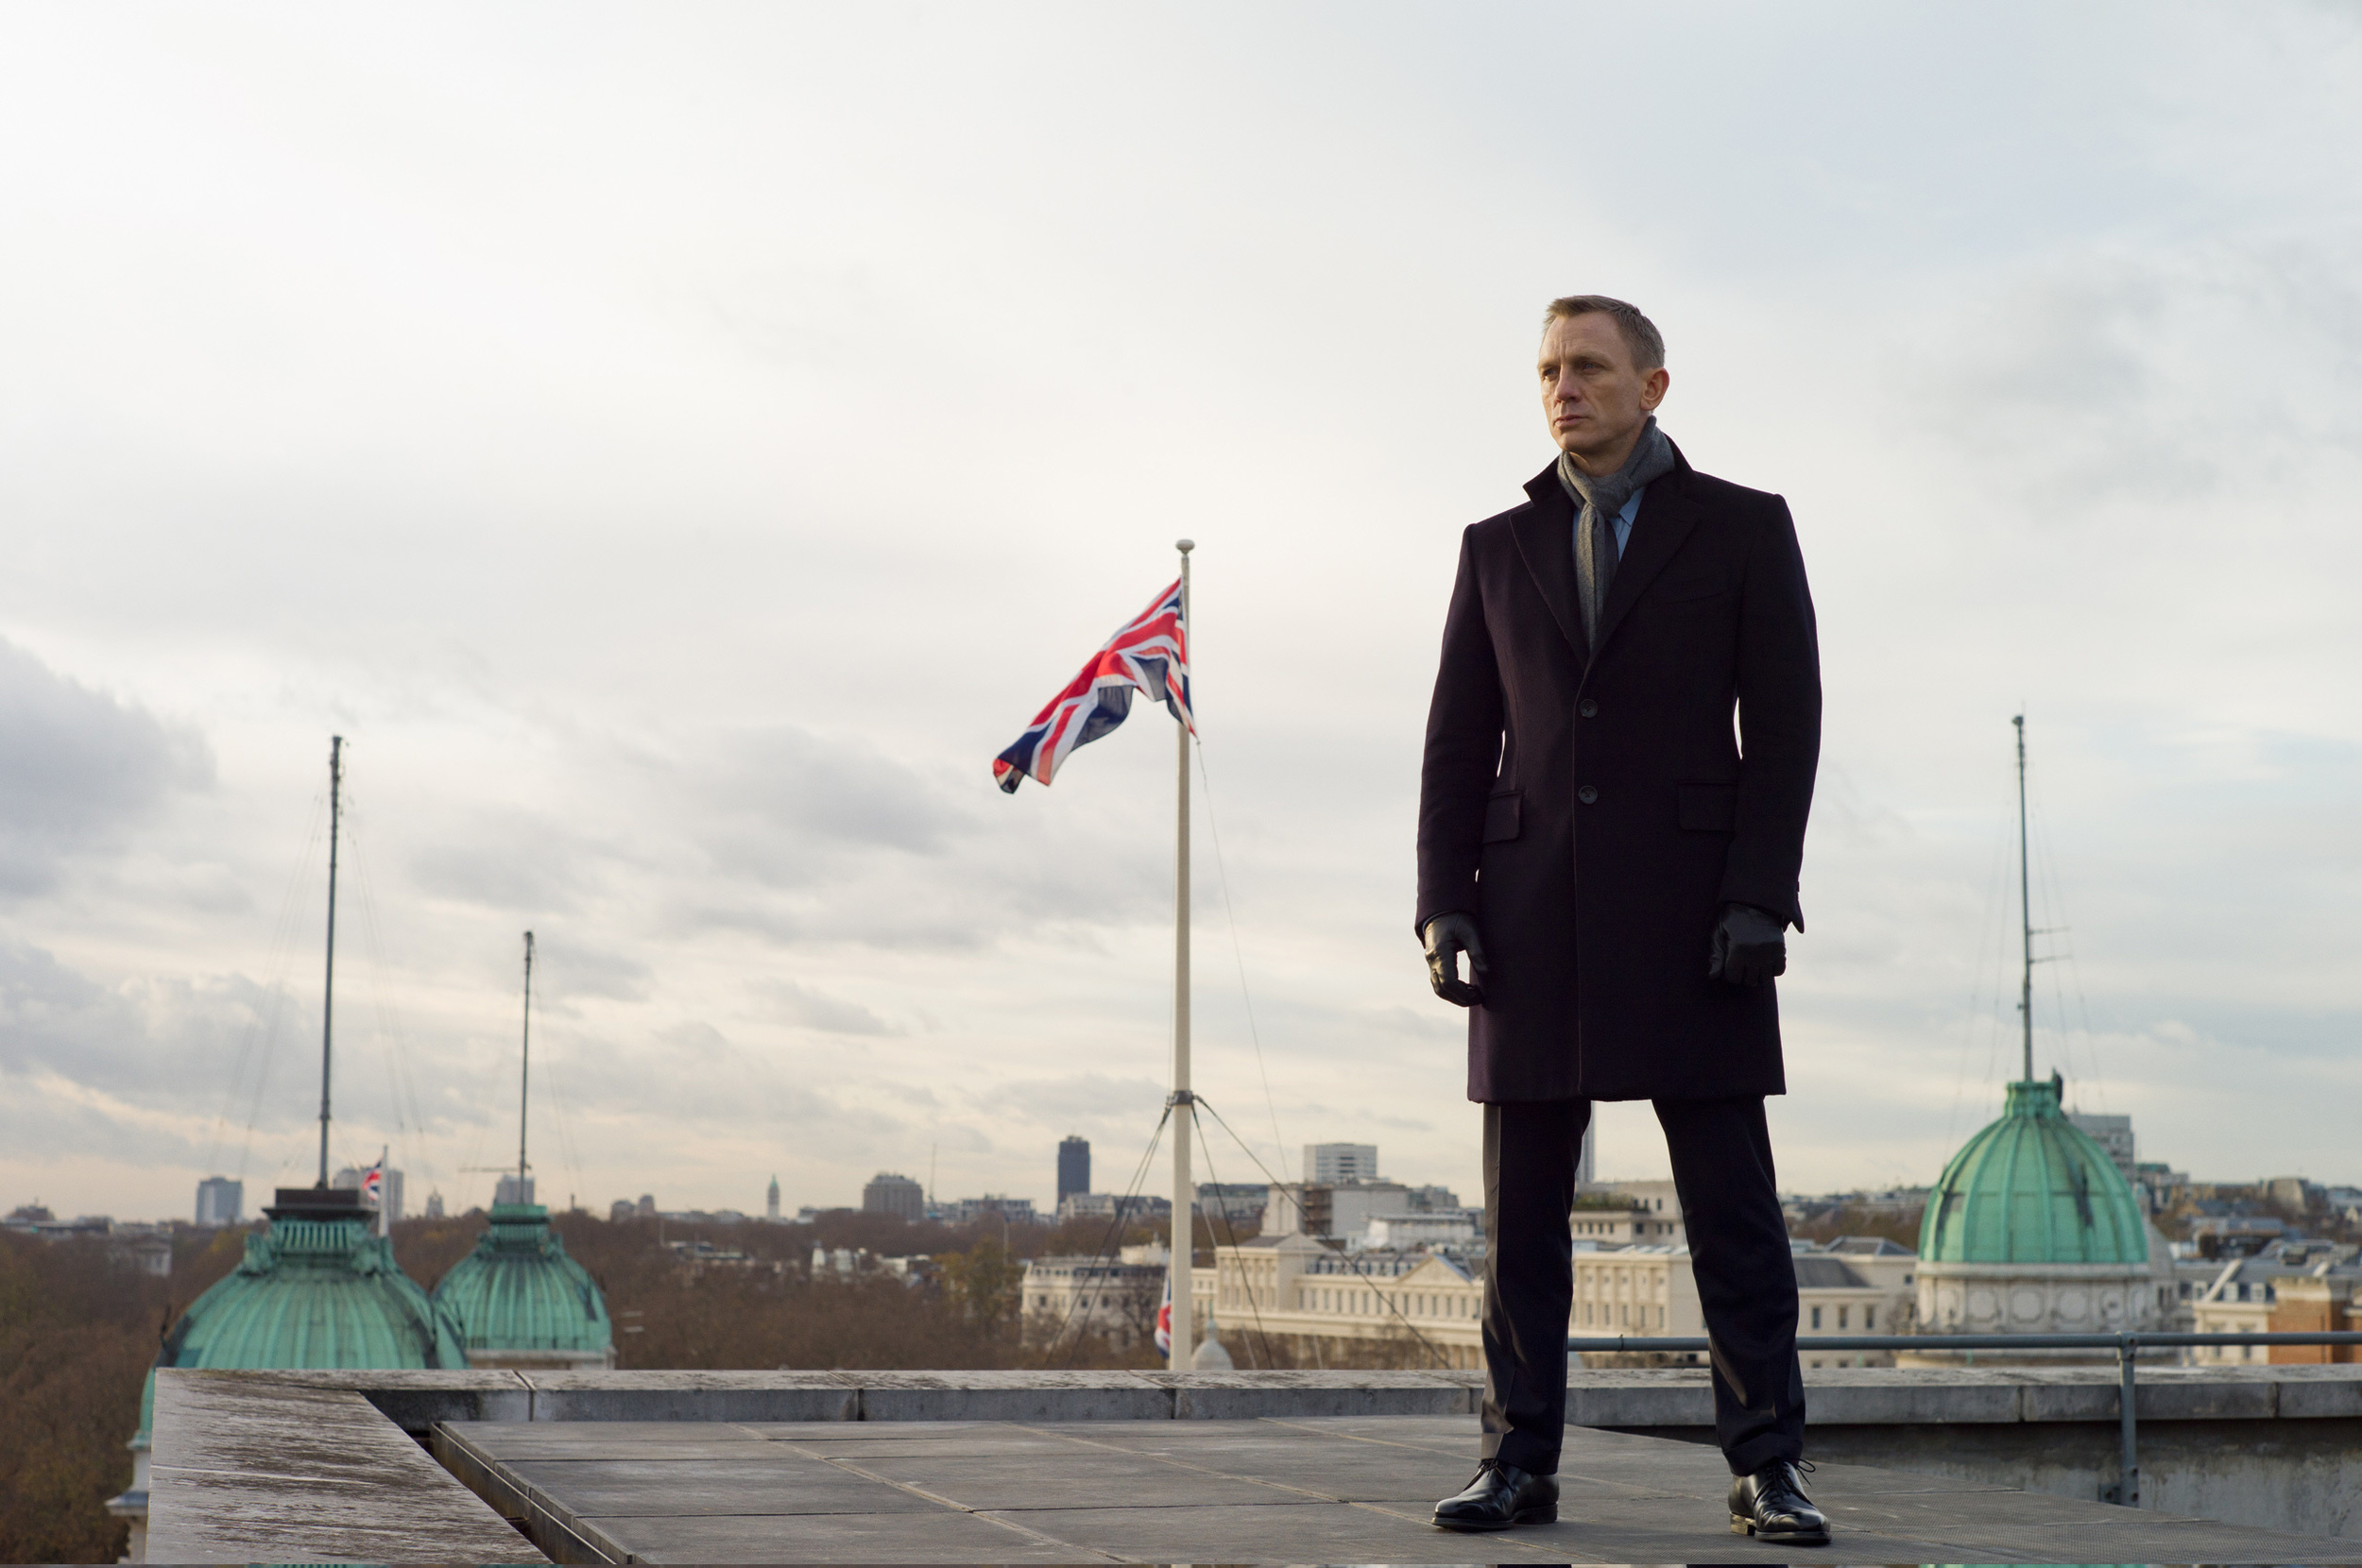 <p>Much like Sherlock, James Bond often spends time in London. Some of his films are more London-focused than others, though. While<em> Skyfall</em> ends in Scotland, much of the action takes place in London, including on the Tube.</p><p><a href='https://www.msn.com/en-us/community/channel/vid-cj9pqbr0vn9in2b6ddcd8sfgpfq6x6utp44fssrv6mc2gtybw0us'>Follow us on MSN to see more of our exclusive entertainment content.</a></p>